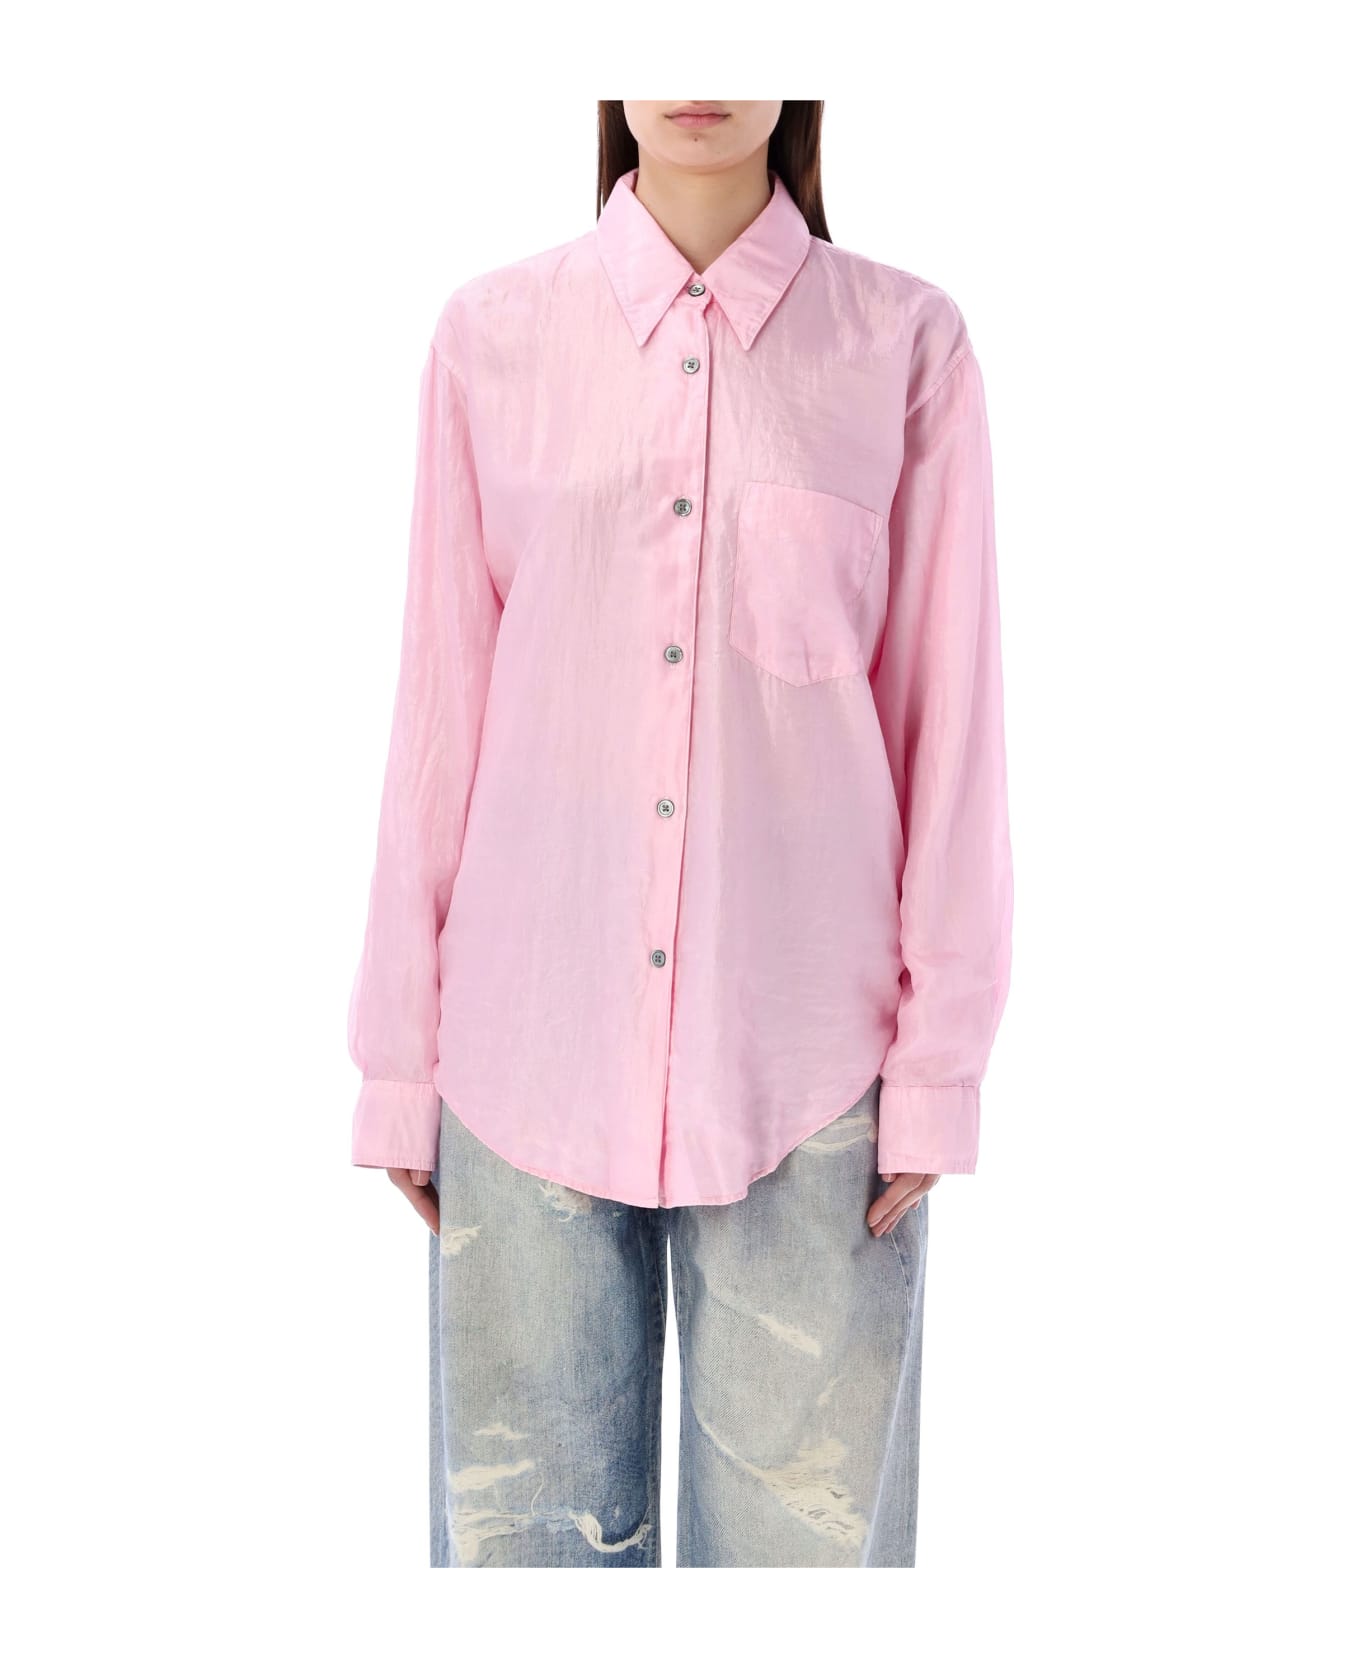 Our Legacy Apron Shirt - PINK シャツ